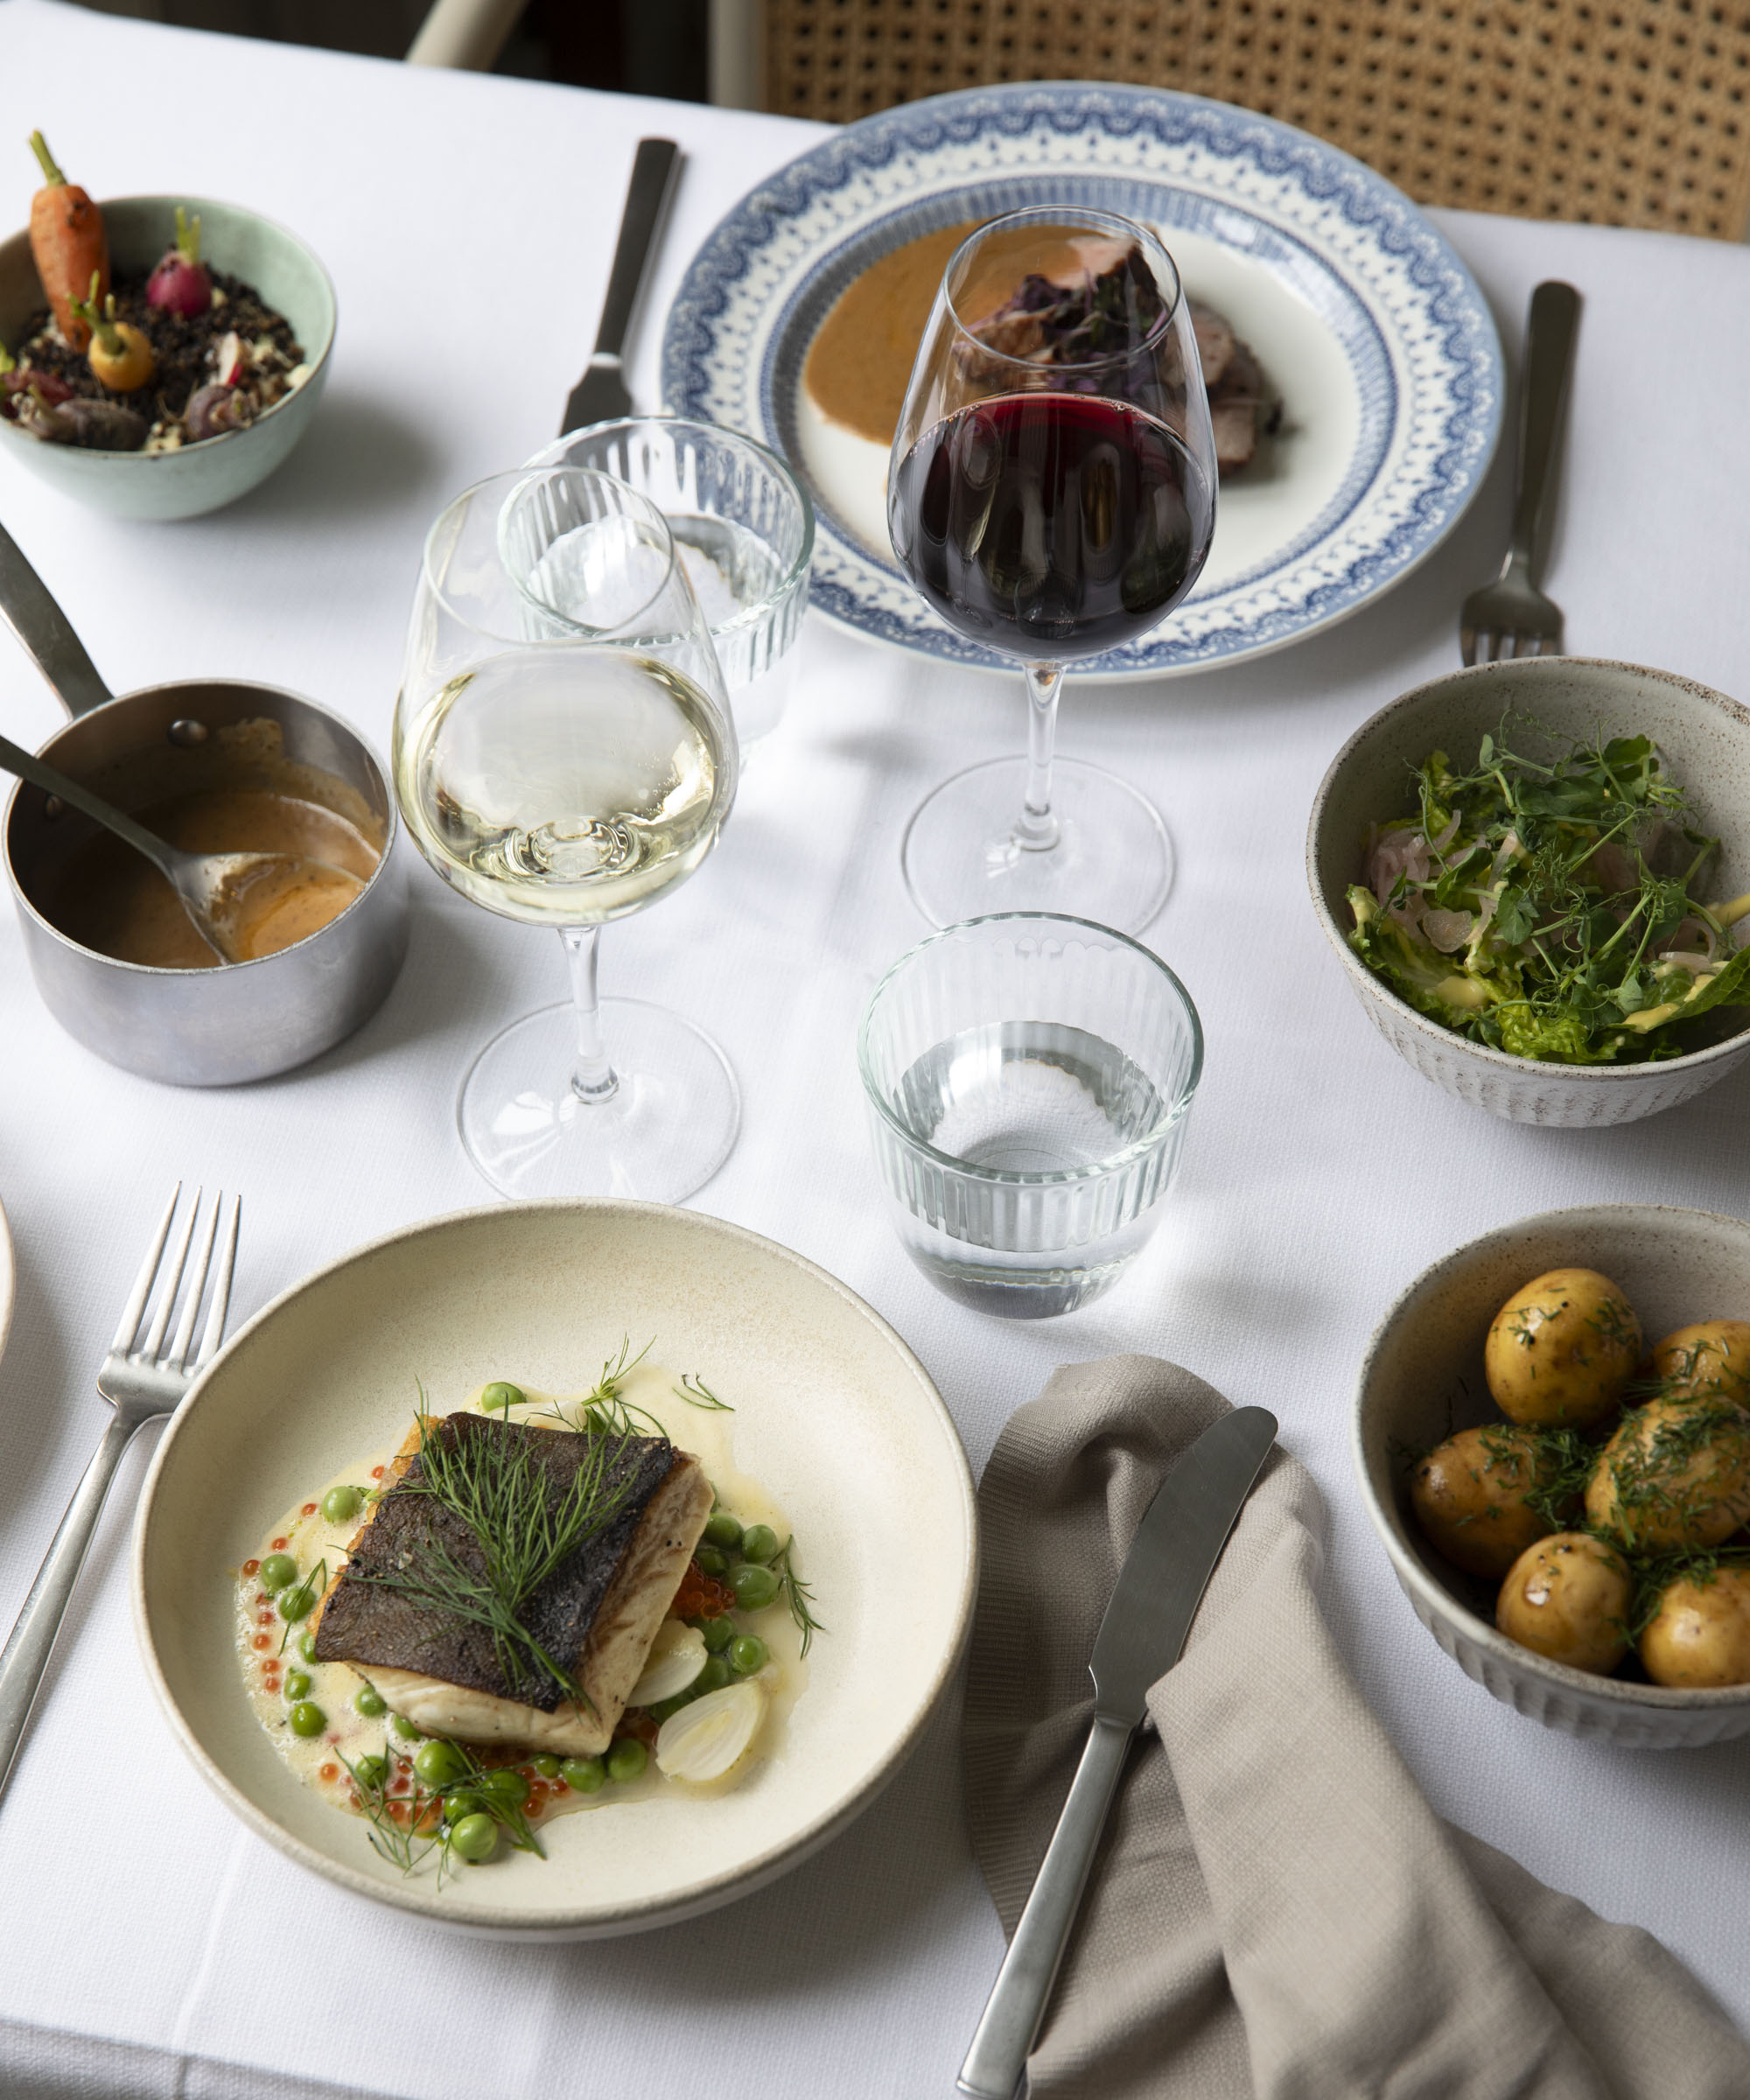 3-course menu + snacks at Fasangården – Today, this stunning restaurant hidden away in Frederiksberg Gardens opens its doors for the new season